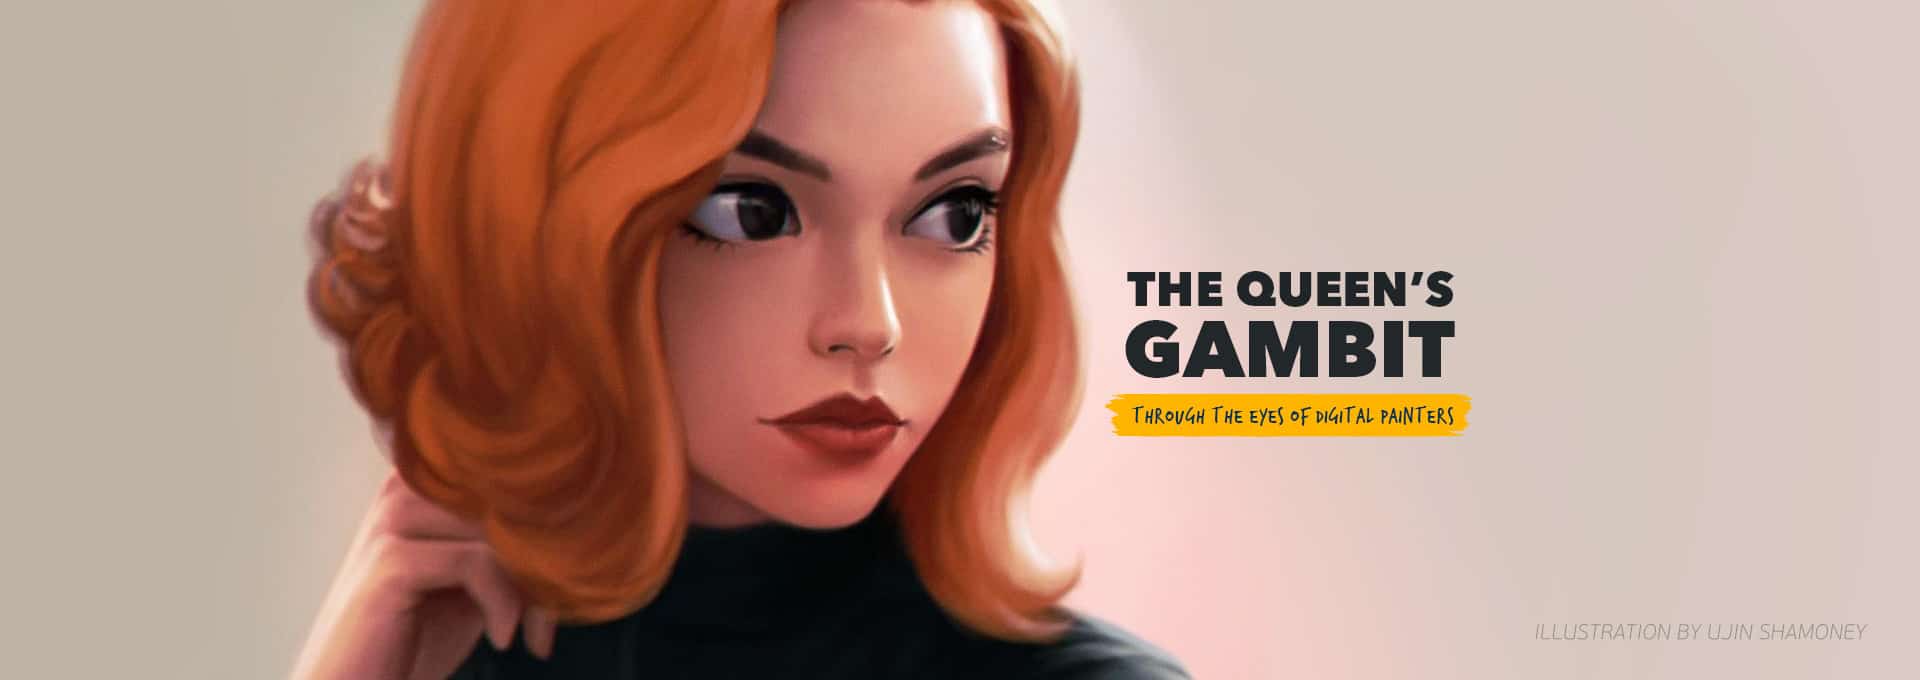 The Queen's Gambit Illustrations - Paintable.cc Digital Painting Gallery